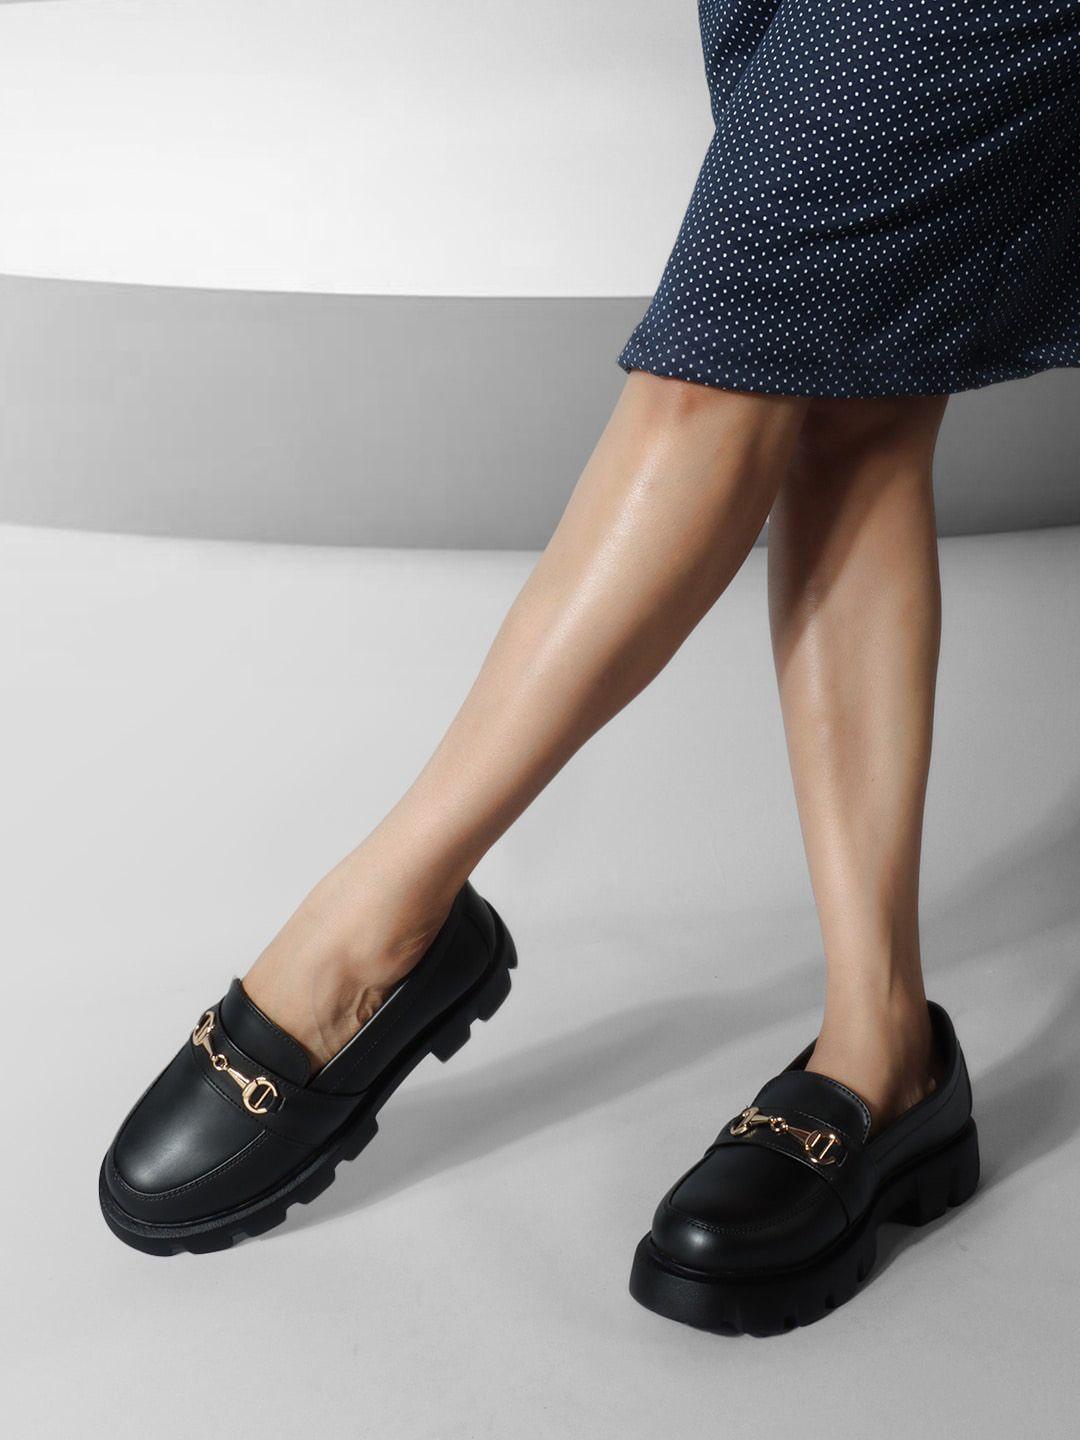 the-roadster-lifestyle-co.-women-black-buckled-lightweight-horsebit-loafers